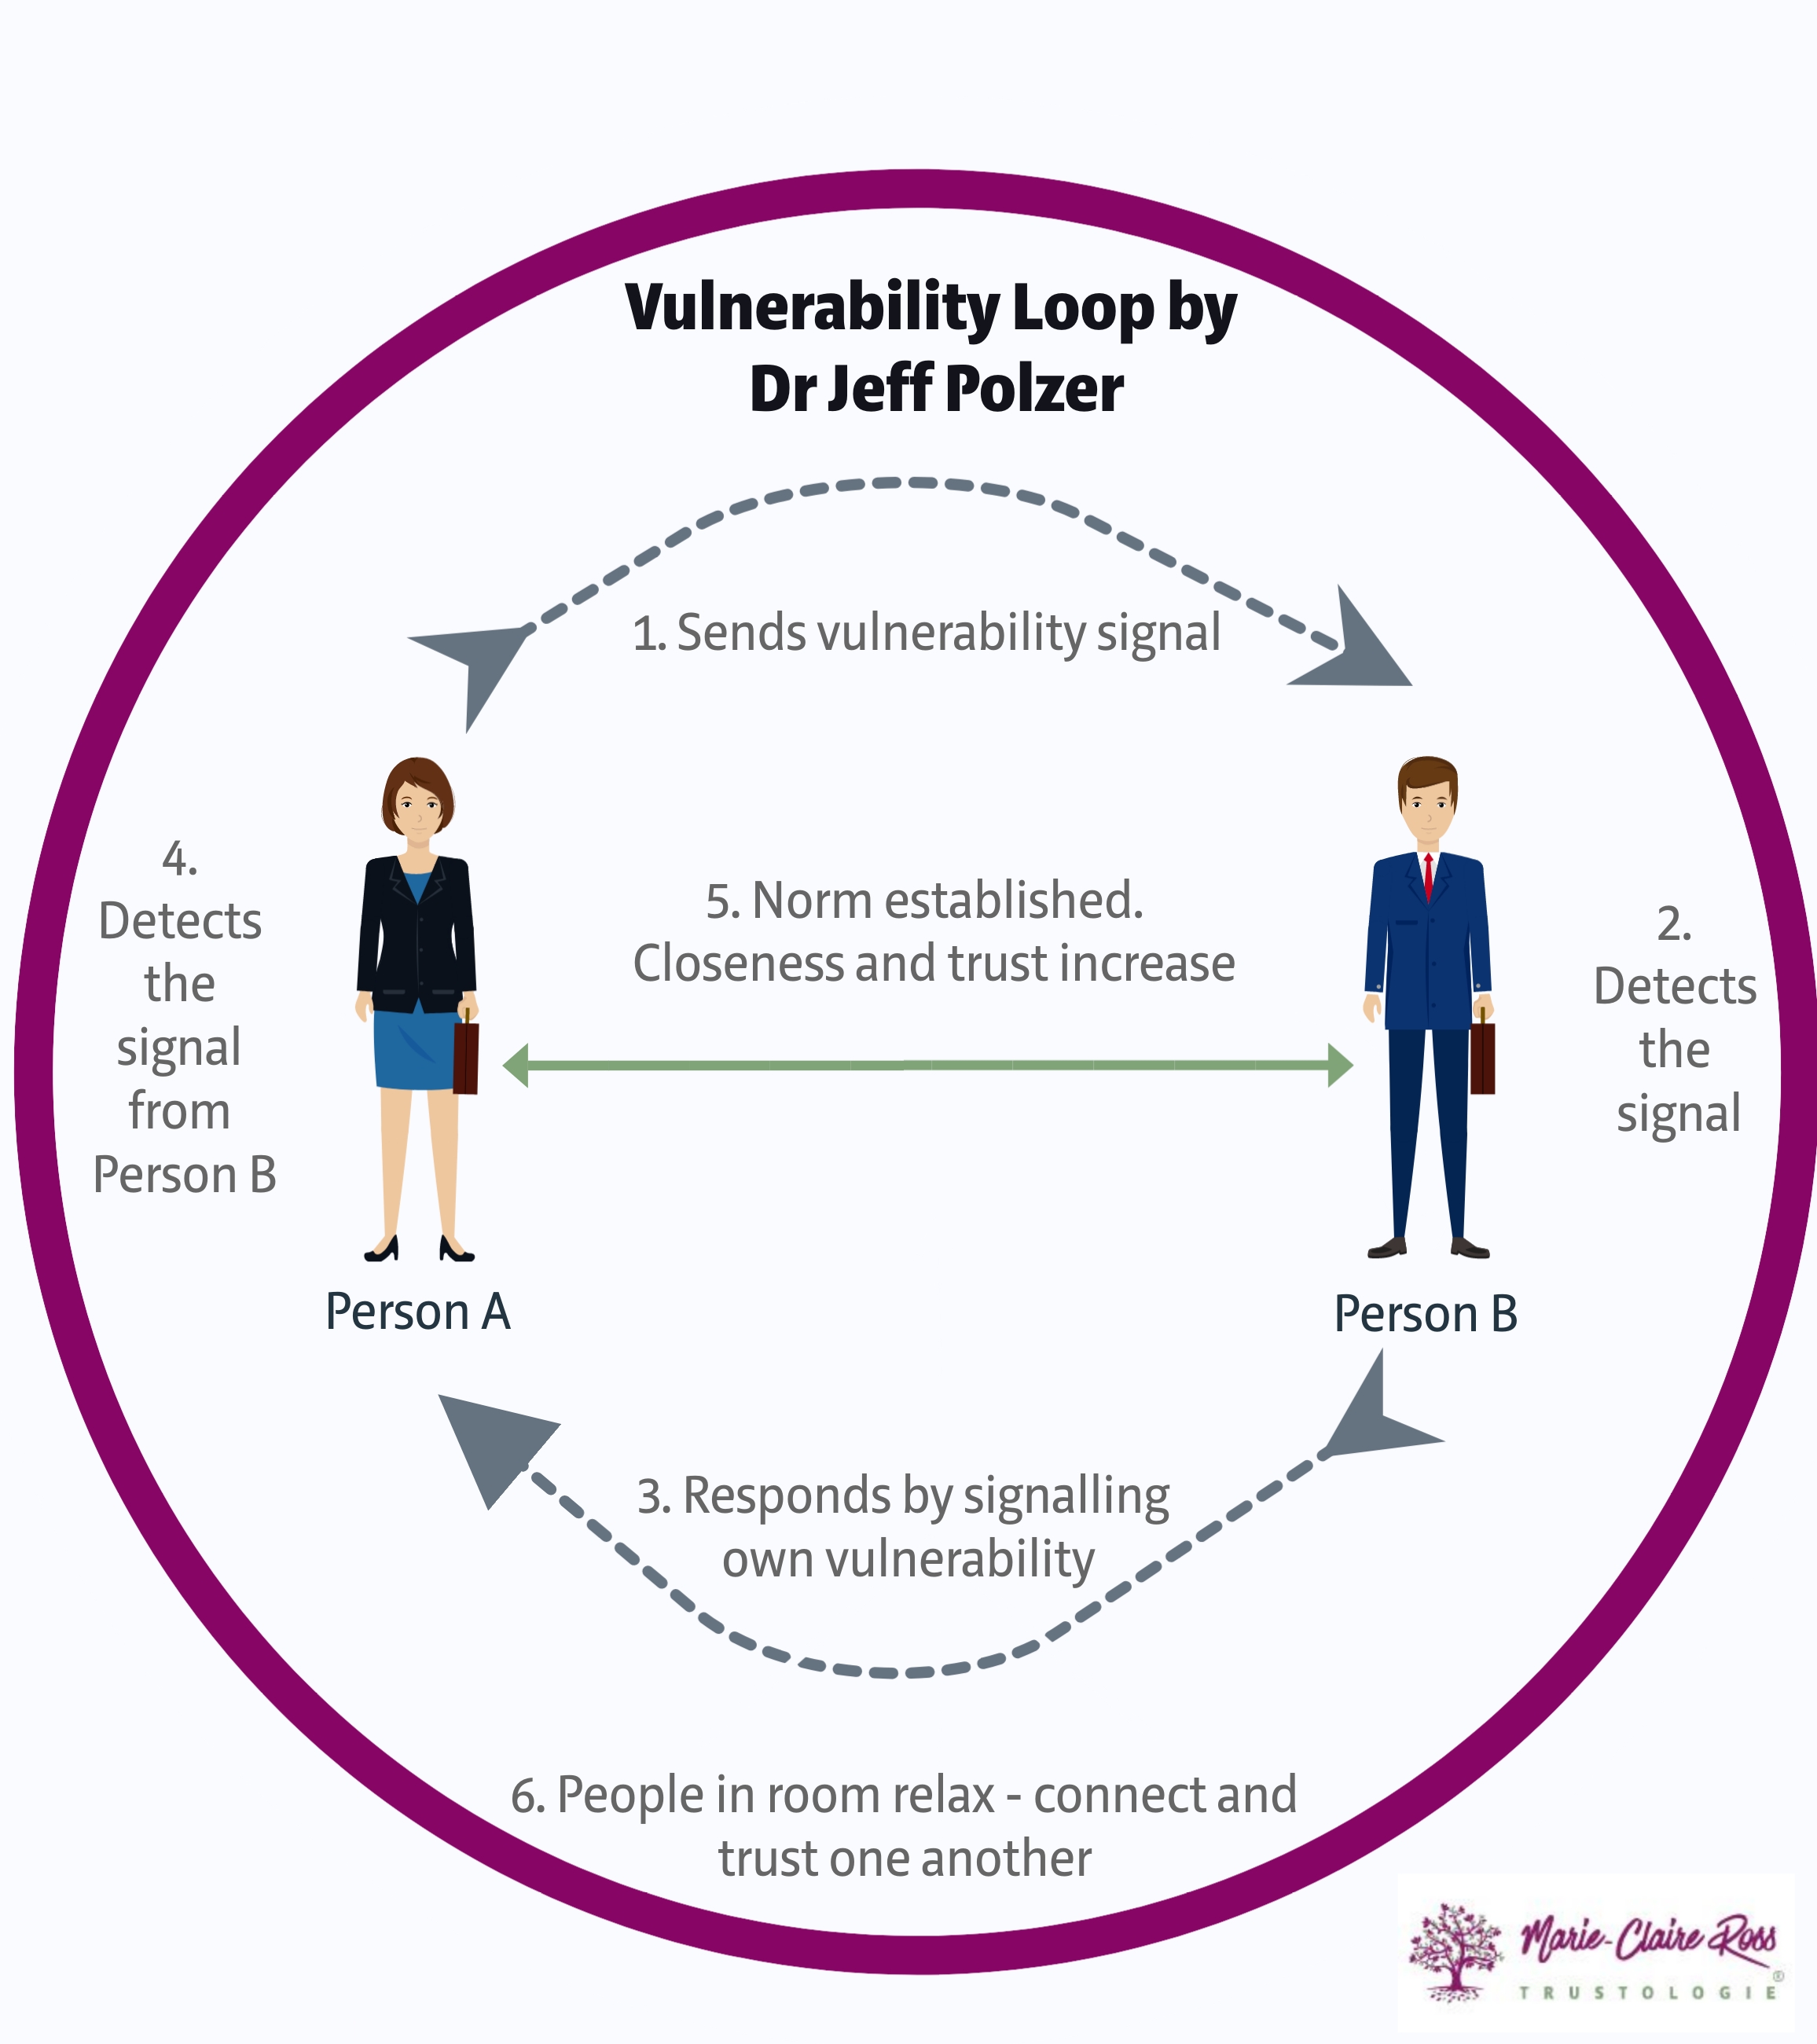 What is considered a vulnerability?